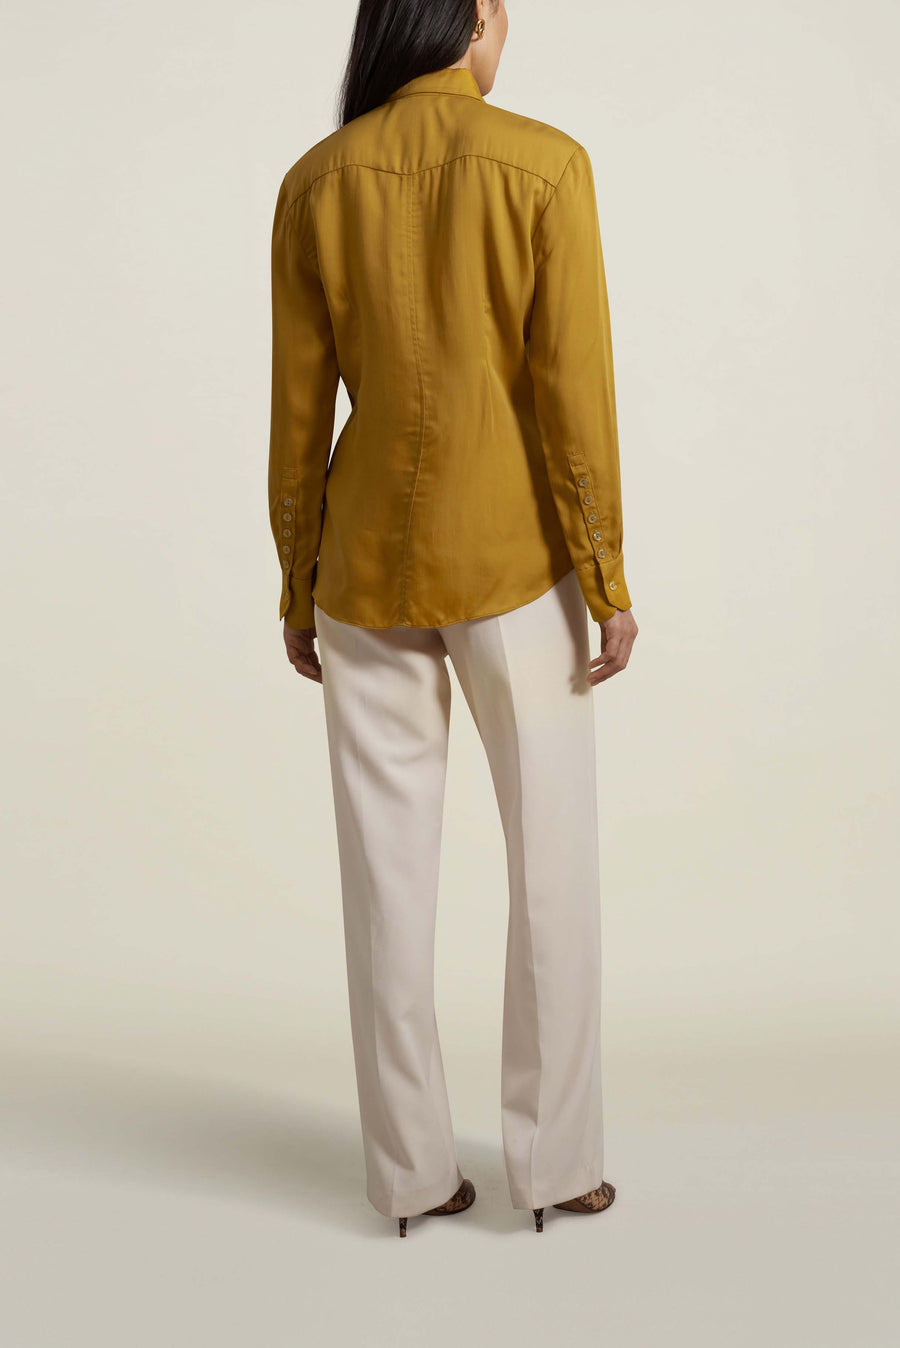 Léa Slim Blouse with Tie in Cupro Satin